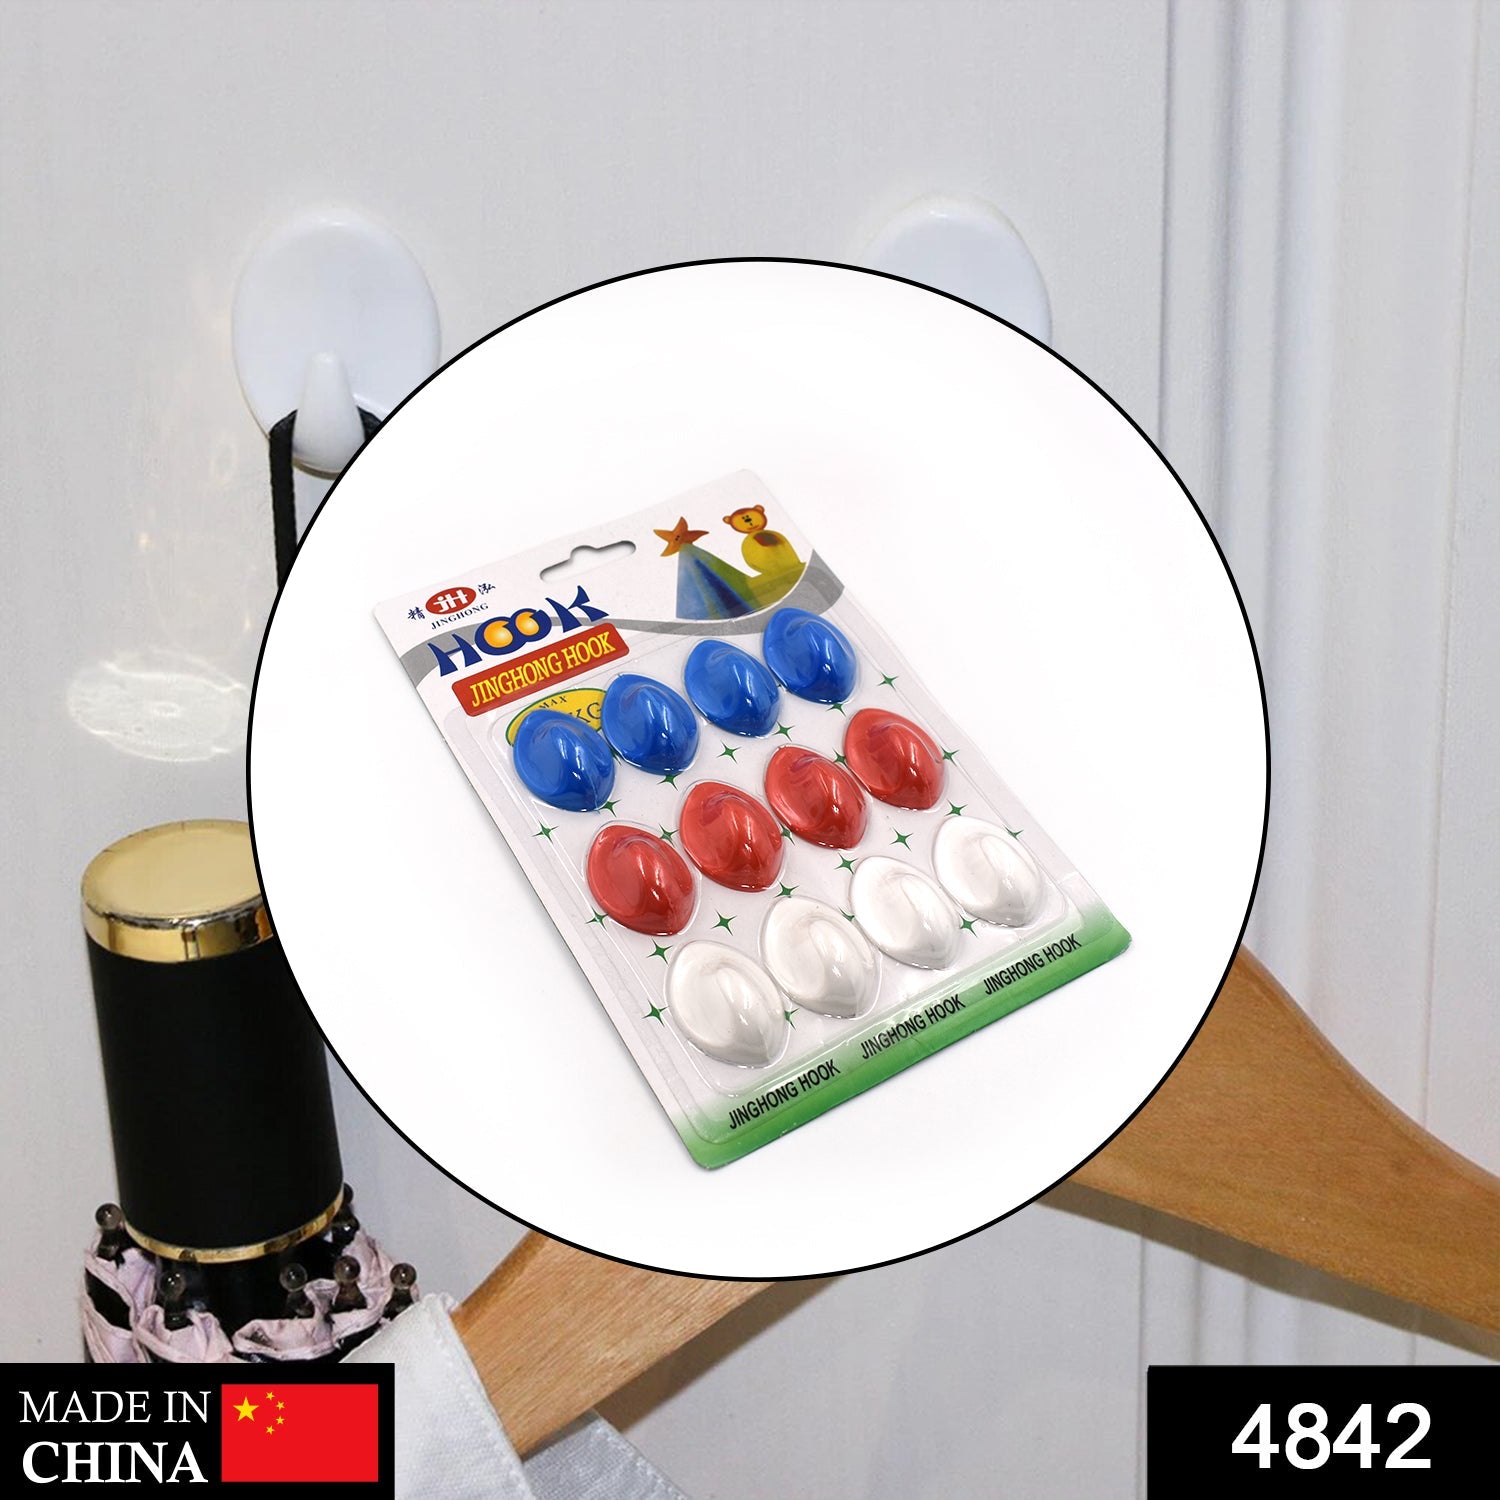 4842 12Pc Plastic Adhesive Hooks For Placing On Wall Surfaces In Order To Hang Various Stuffs And Items. DeoDap